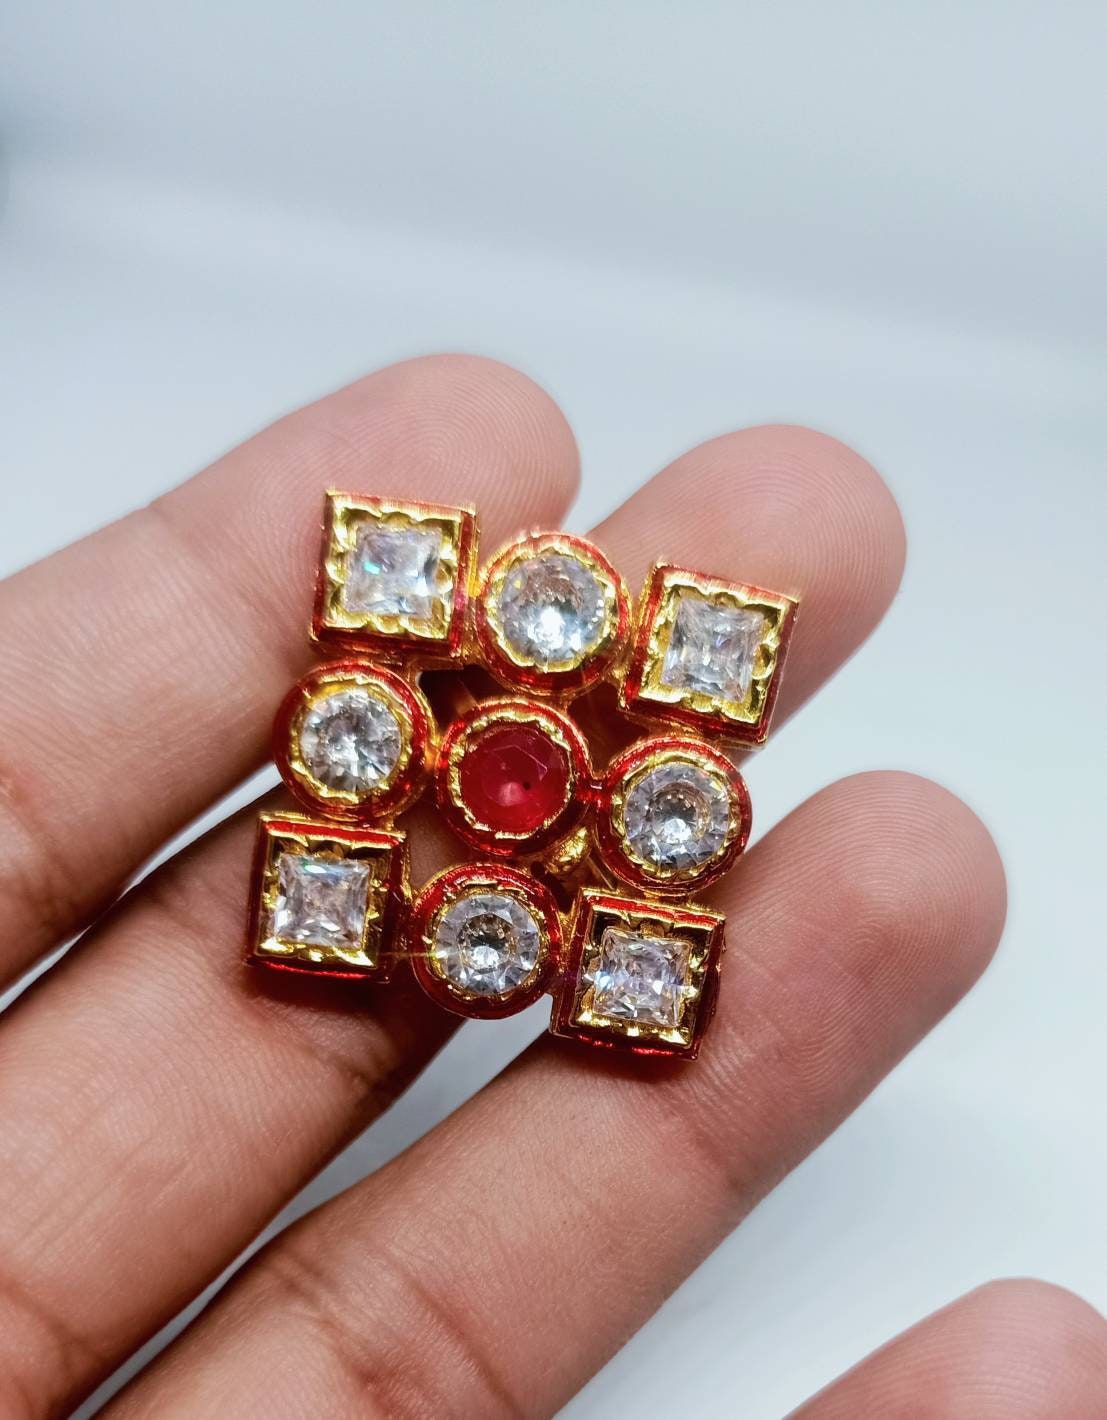 Ad Rings, Party Wear, Gift for Her, Beautiful Ring, Statement Ring, Red Ring, Gold Ring, Wedding Ring, Indian Ring, Diwali Gift, Bridal Ring | Save 33% - Rajasthan Living 15